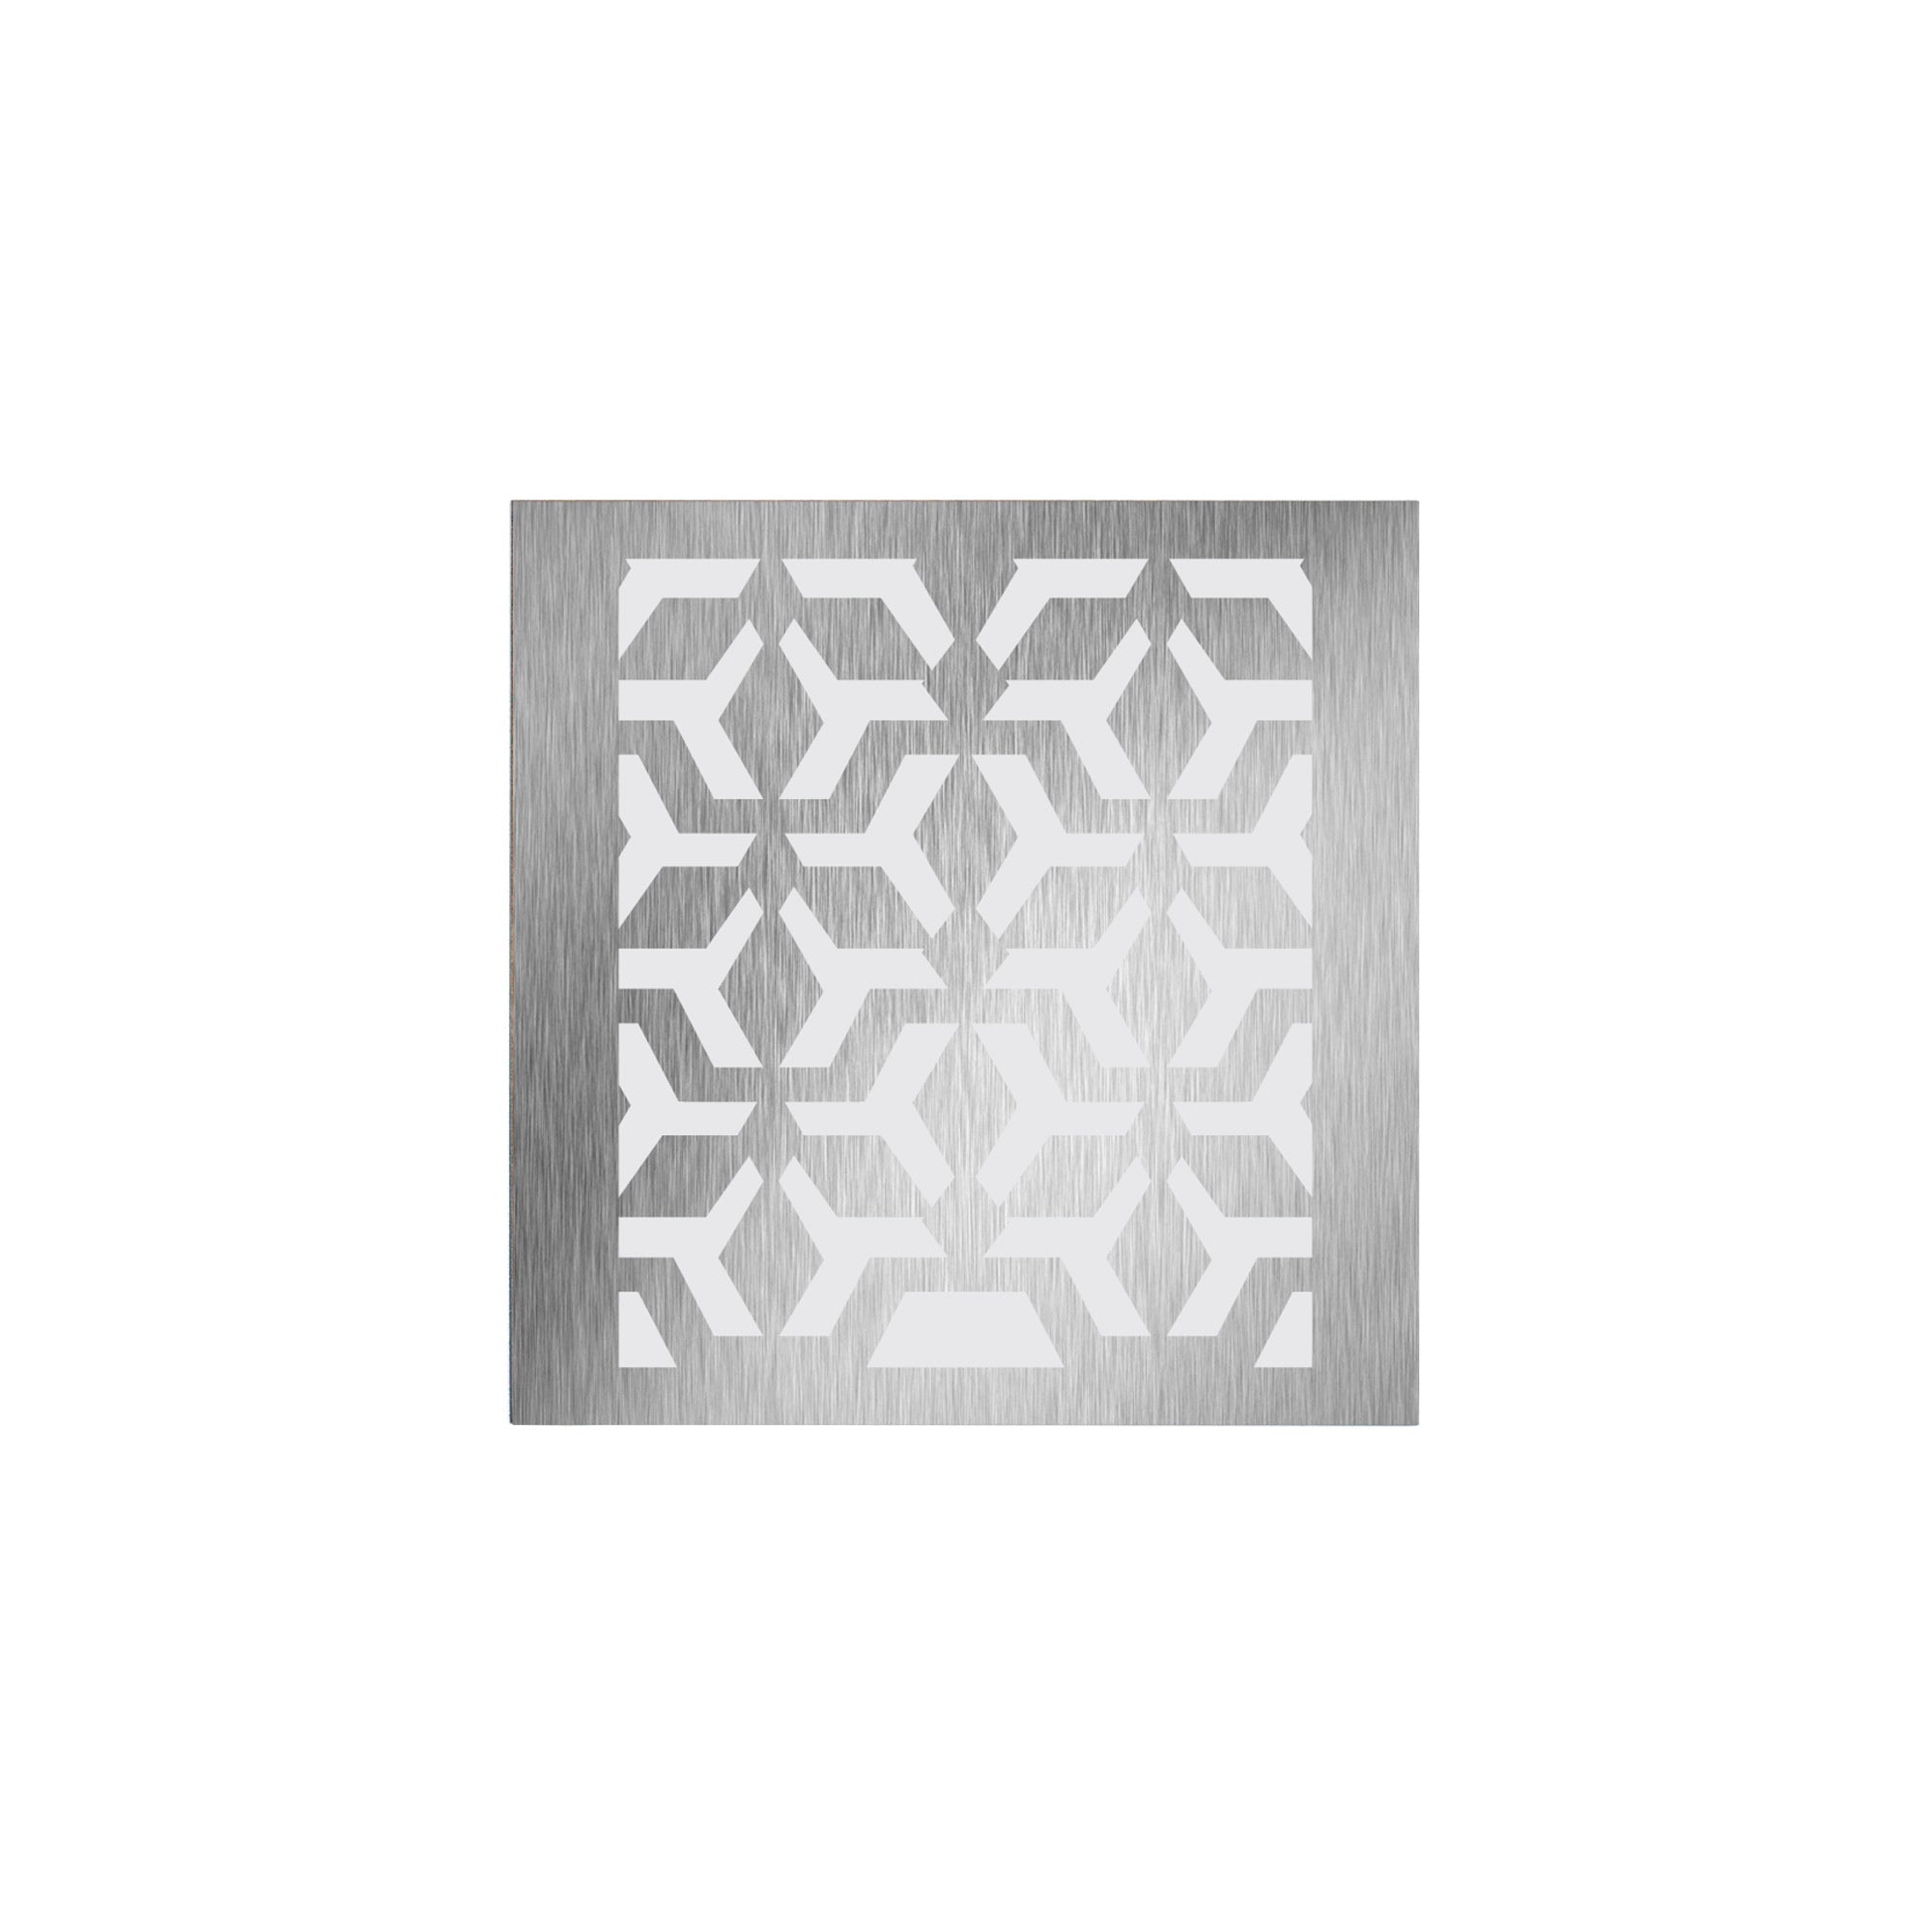 The Zen Wall Sconce from Seascape Fixtures, Aztec style in silver color.